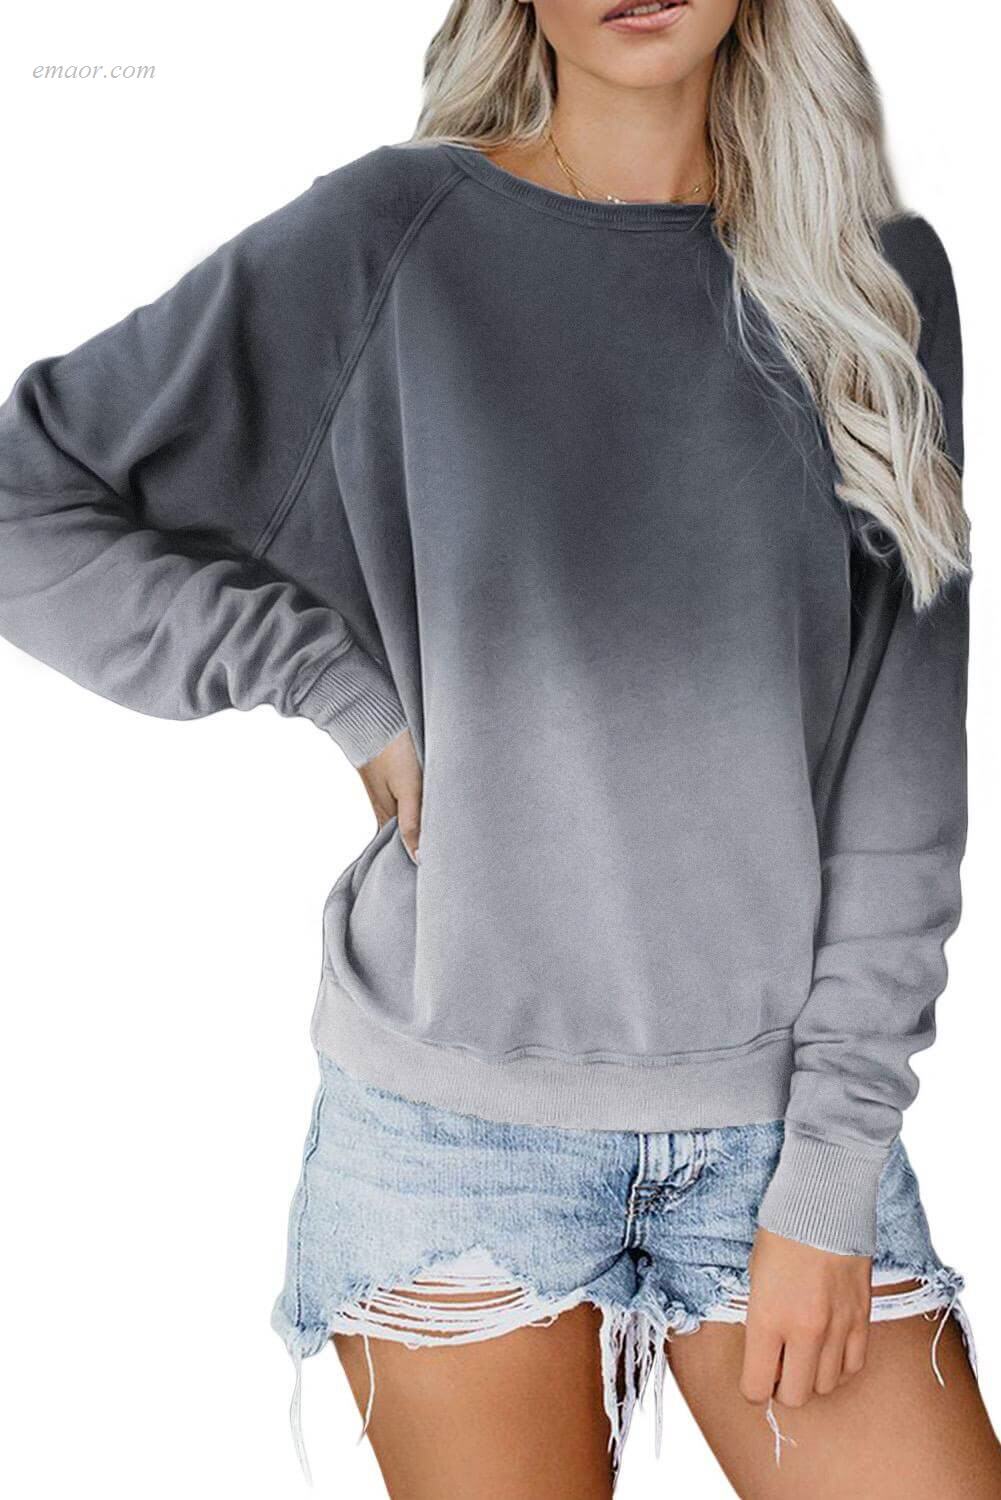 Outerwear Women's Thermal Plaid Thermal Outerwear Ombre Crewneck Long Sleeve Sweatshirt Outerwear